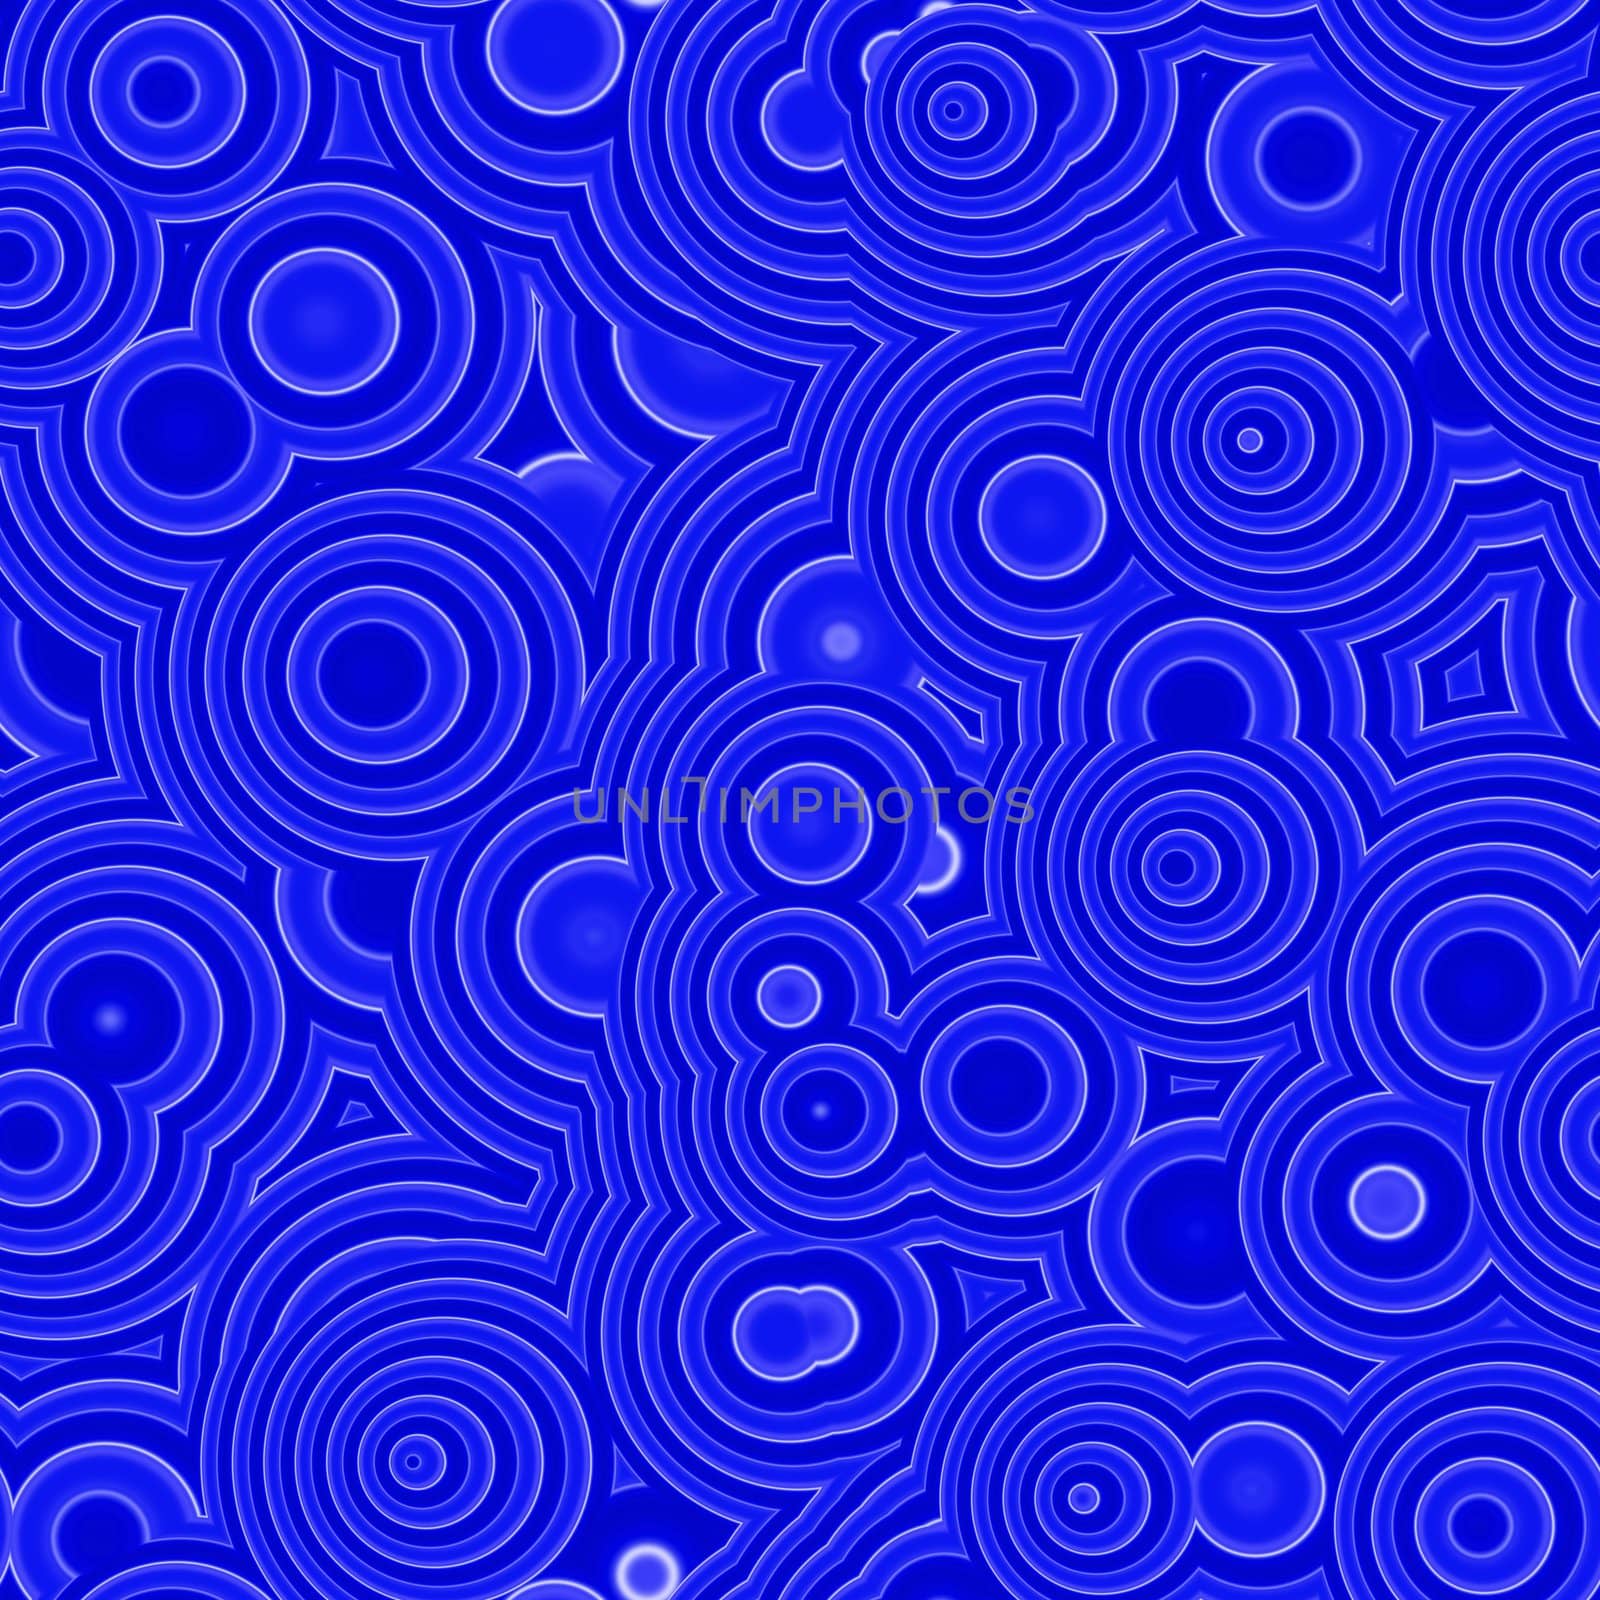 pattern of blue rings in retro seventies style